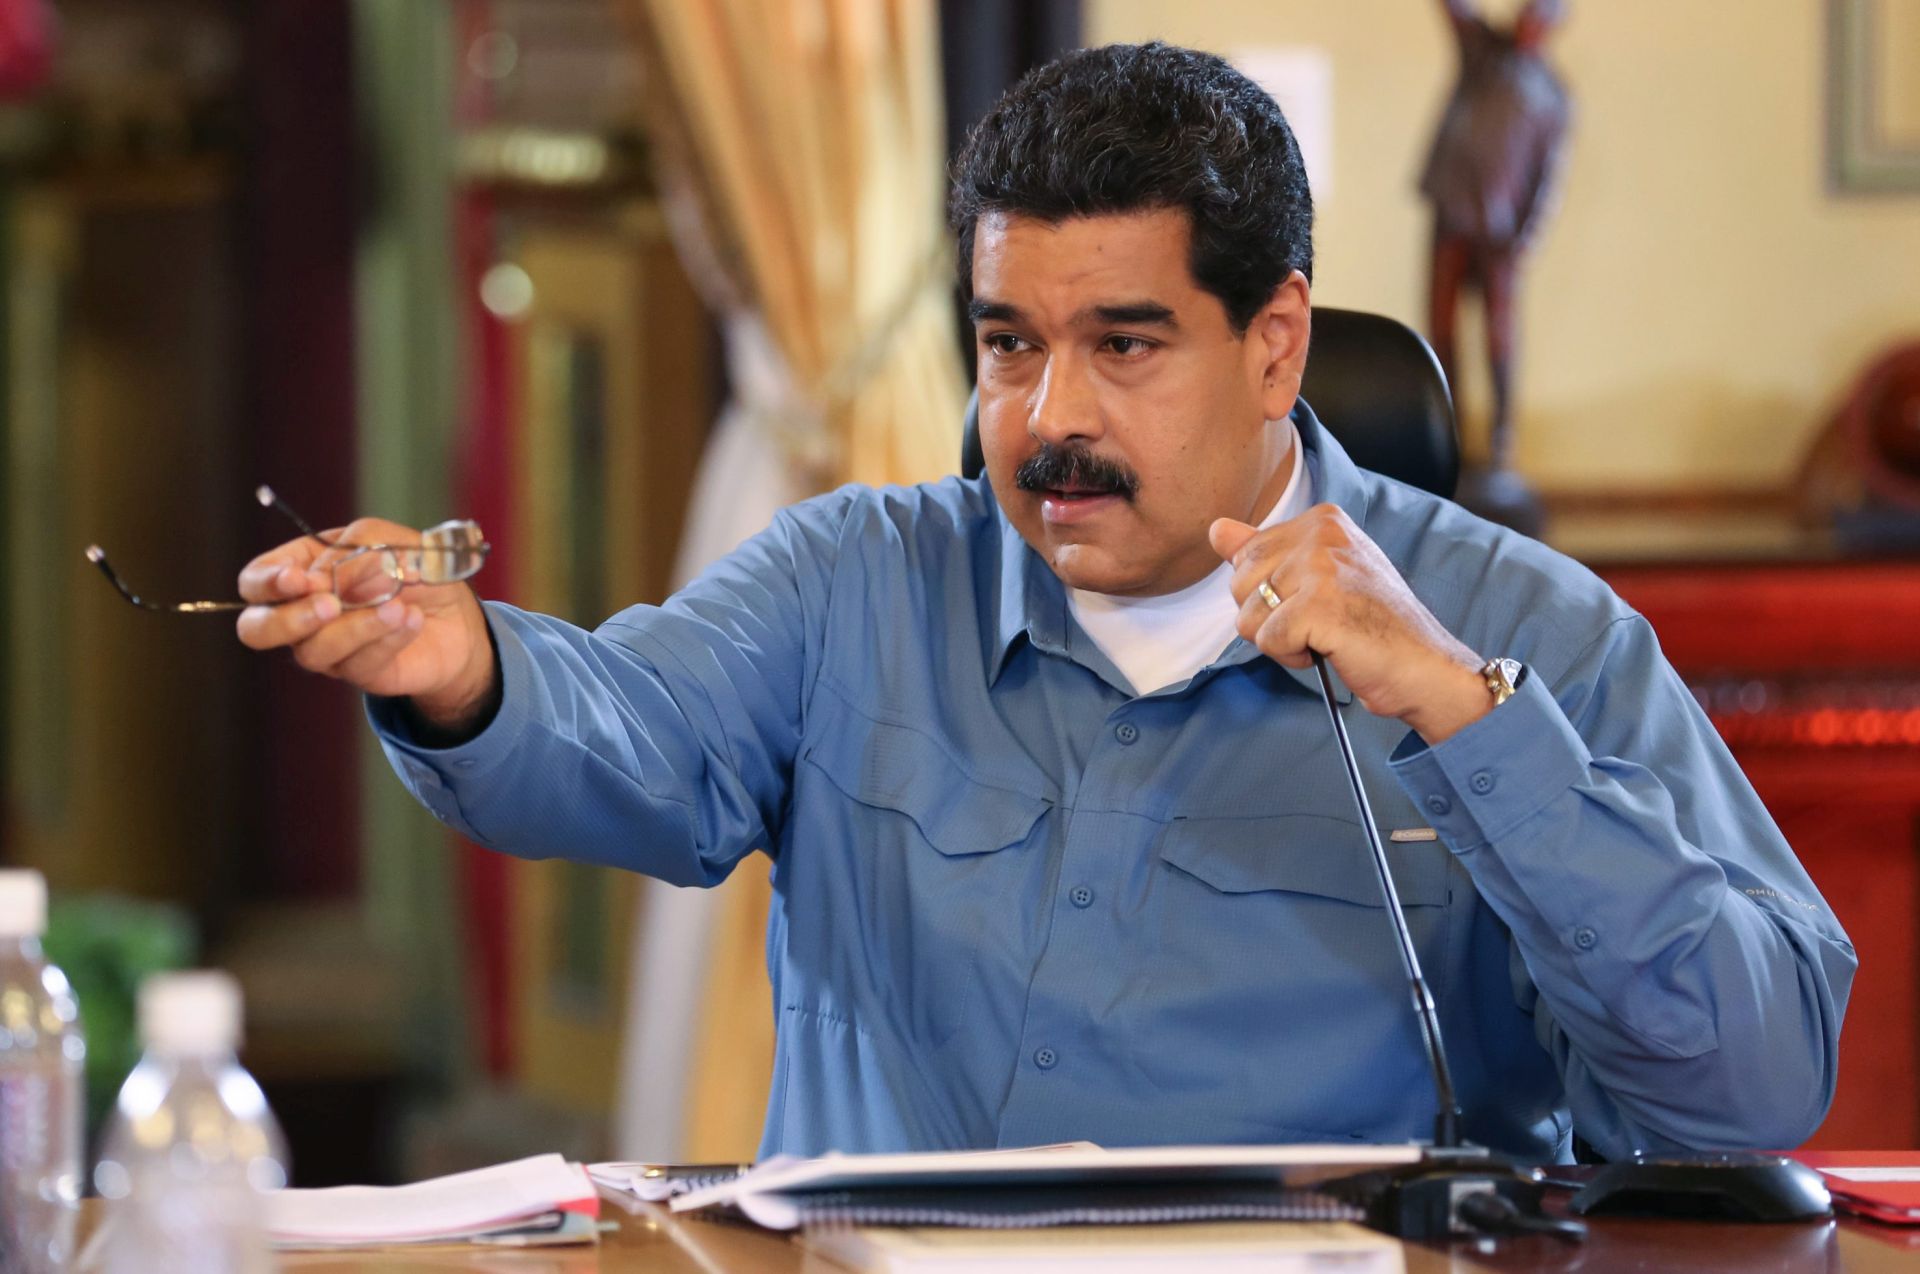 epa05421242 A handout picture made available by the Miraflores Press shows President of Venezuela Nicolas Maduro gesturing during a ministerial meeting at the Palacio Miraflores in Caracas, Venezuela, 11 July 2016. President Nicolas Maduro reiterated his invitation to meet Speaker of the National Assembly of Venezuela Henry Ramos Allup.  EPA/MIRAFLORES PRESS/HANDOUT  HANDOUT EDITORIAL USE ONLY/NO SALES